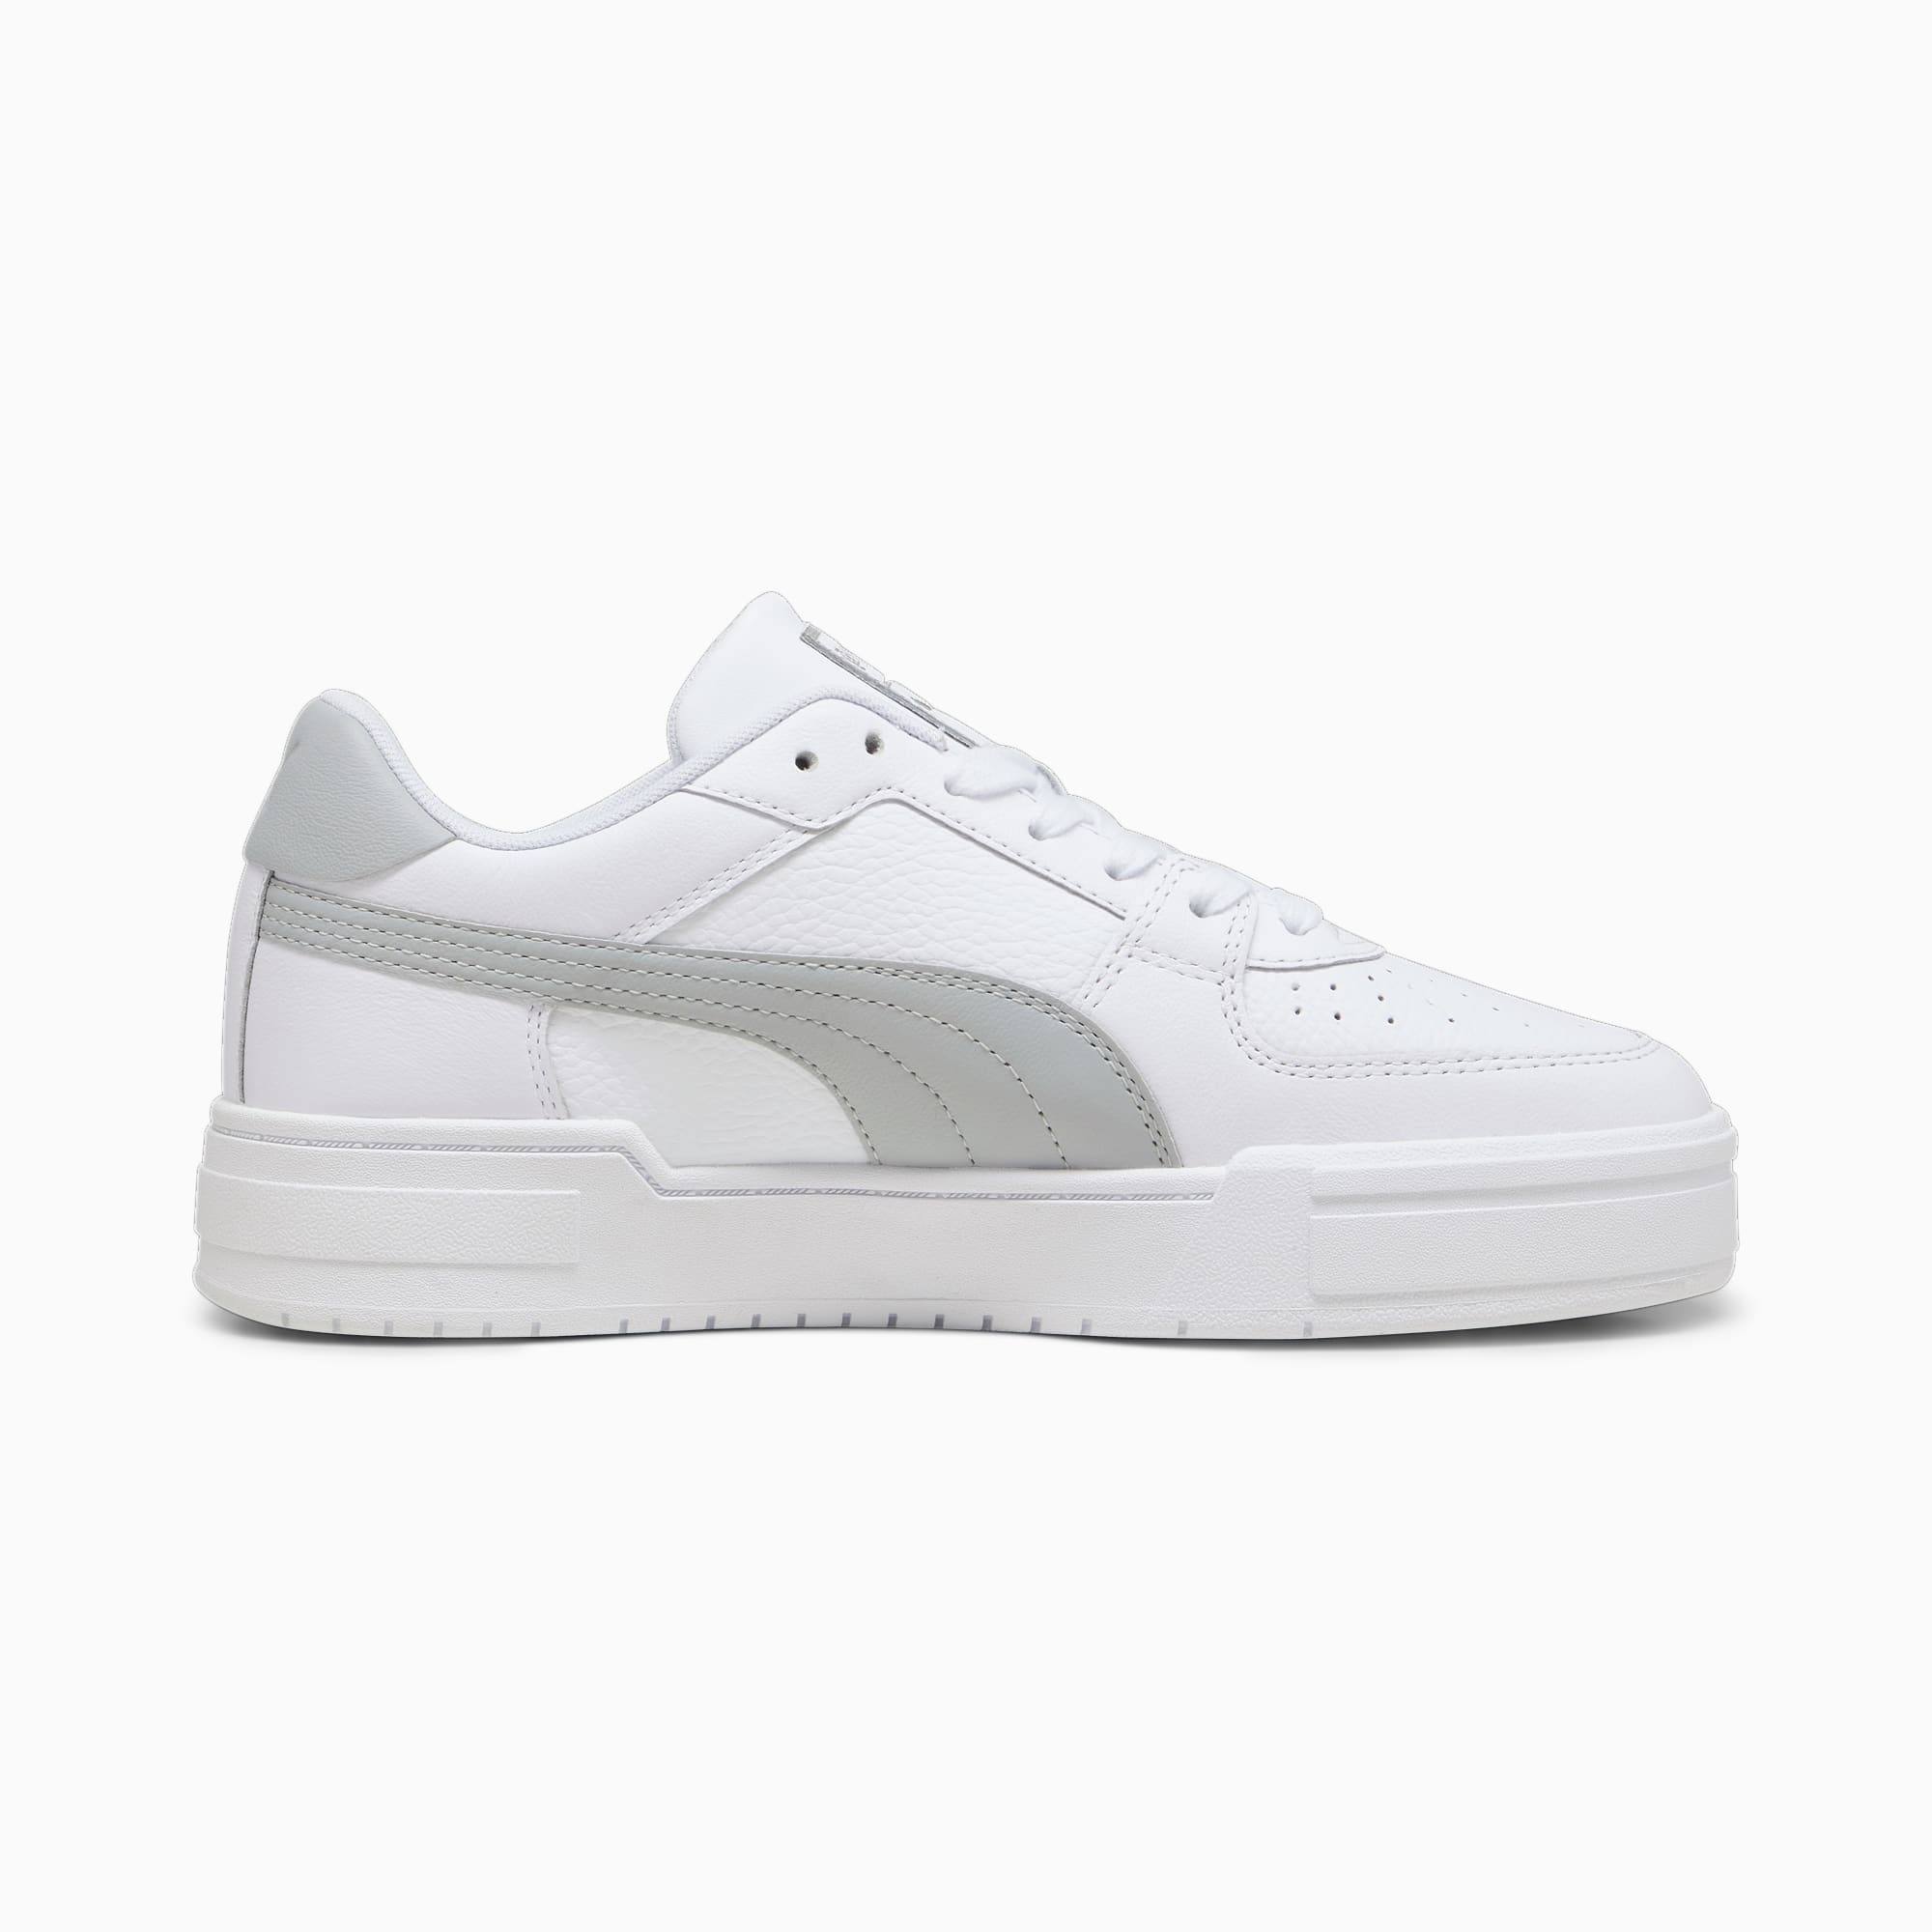 Women's PUMA Ca Pro Classic Trainers, White/Cool Light Grey, Size 36, Shoes